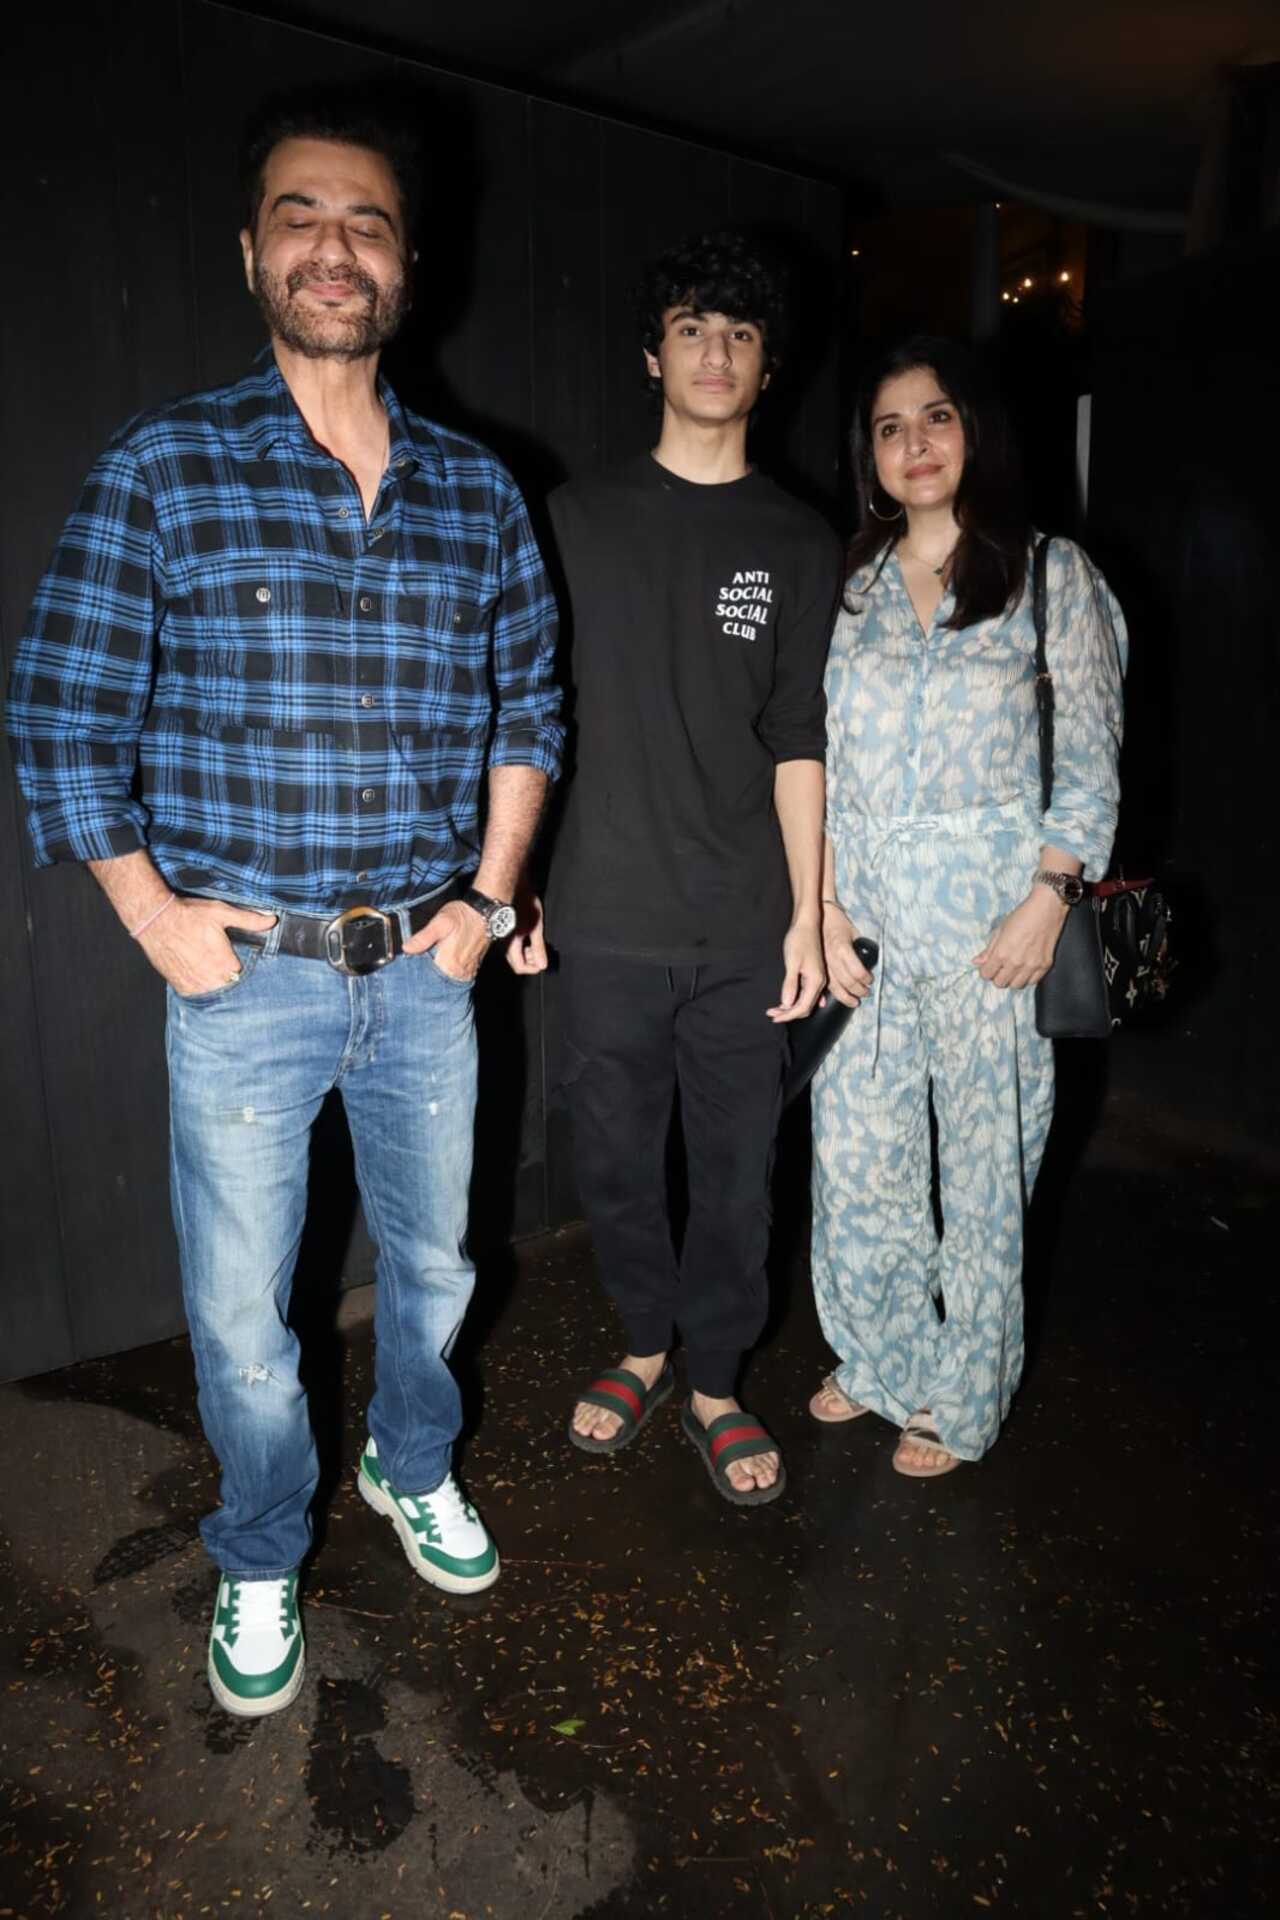 Sanjay Kapoor and Maheep Kapoor with their son got clicked at Boney Kapoor's mom's house in Andheri